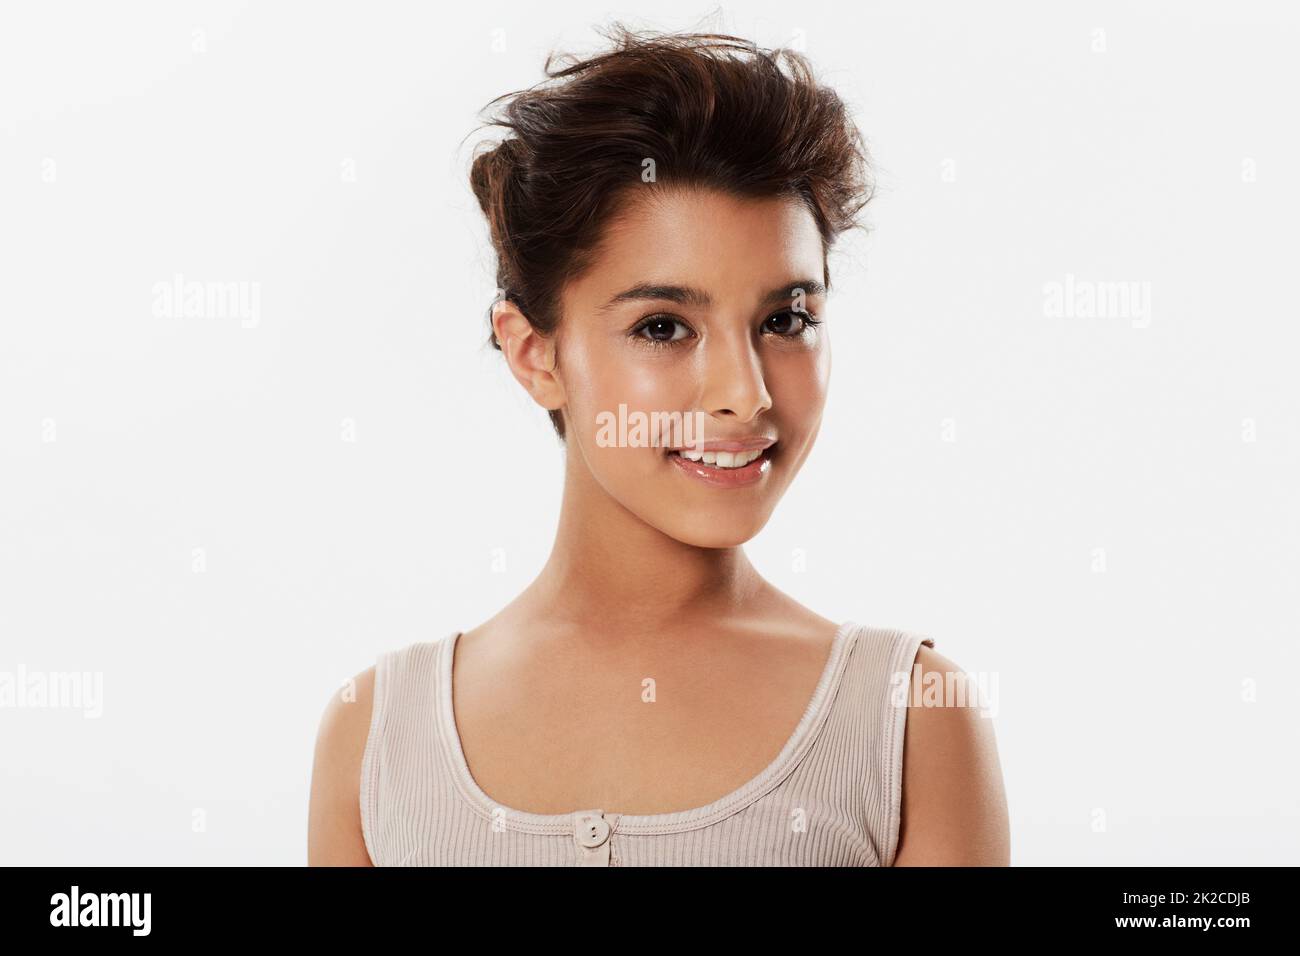 Active and loving it. A young woman in casual wear smiling at the camera. Stock Photo